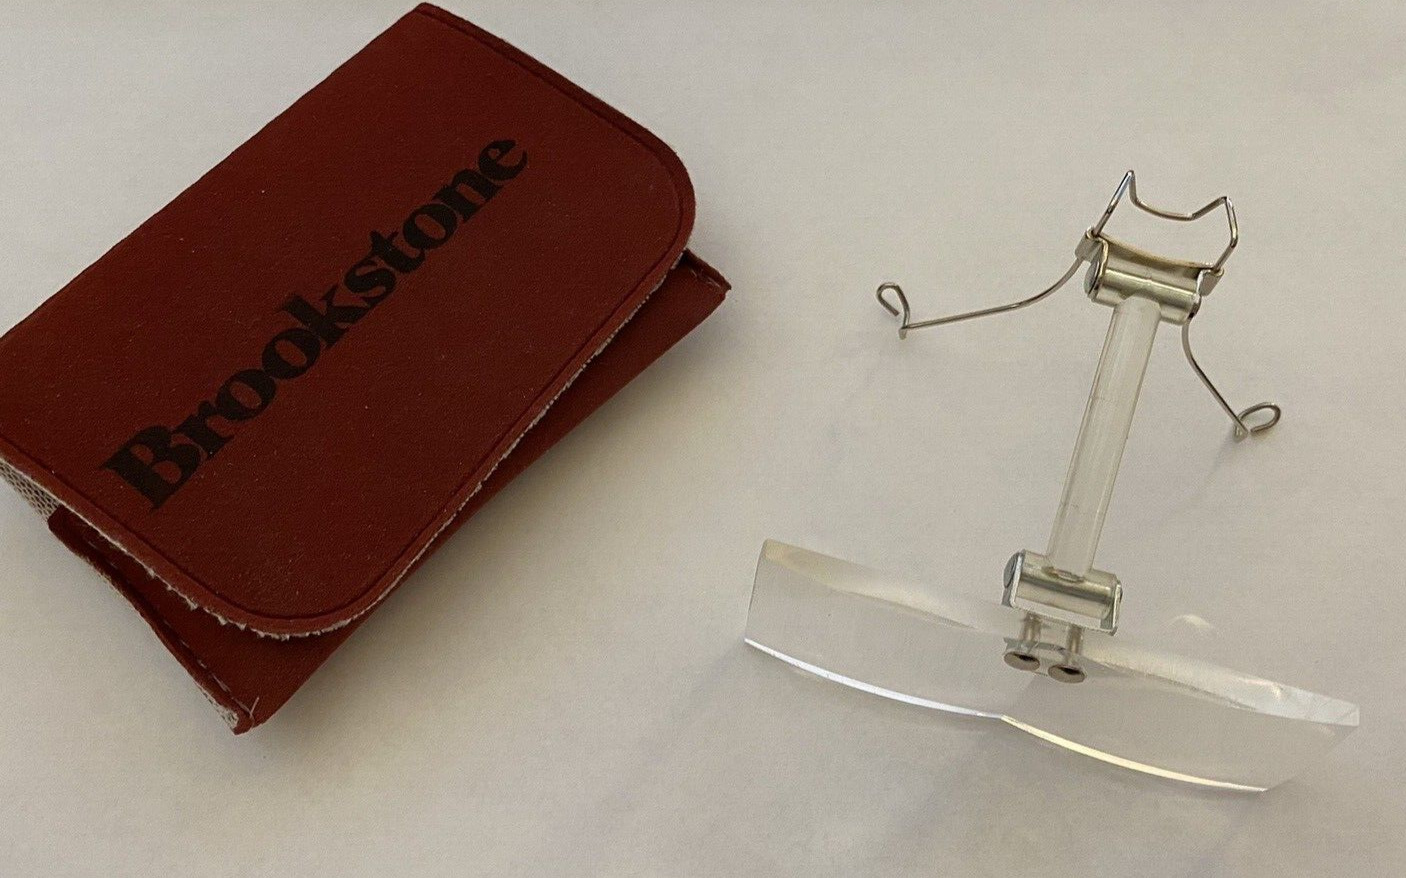 Vintage Brookstone Optic Aid No. 3102 Clip-On Magnifier in original pouch